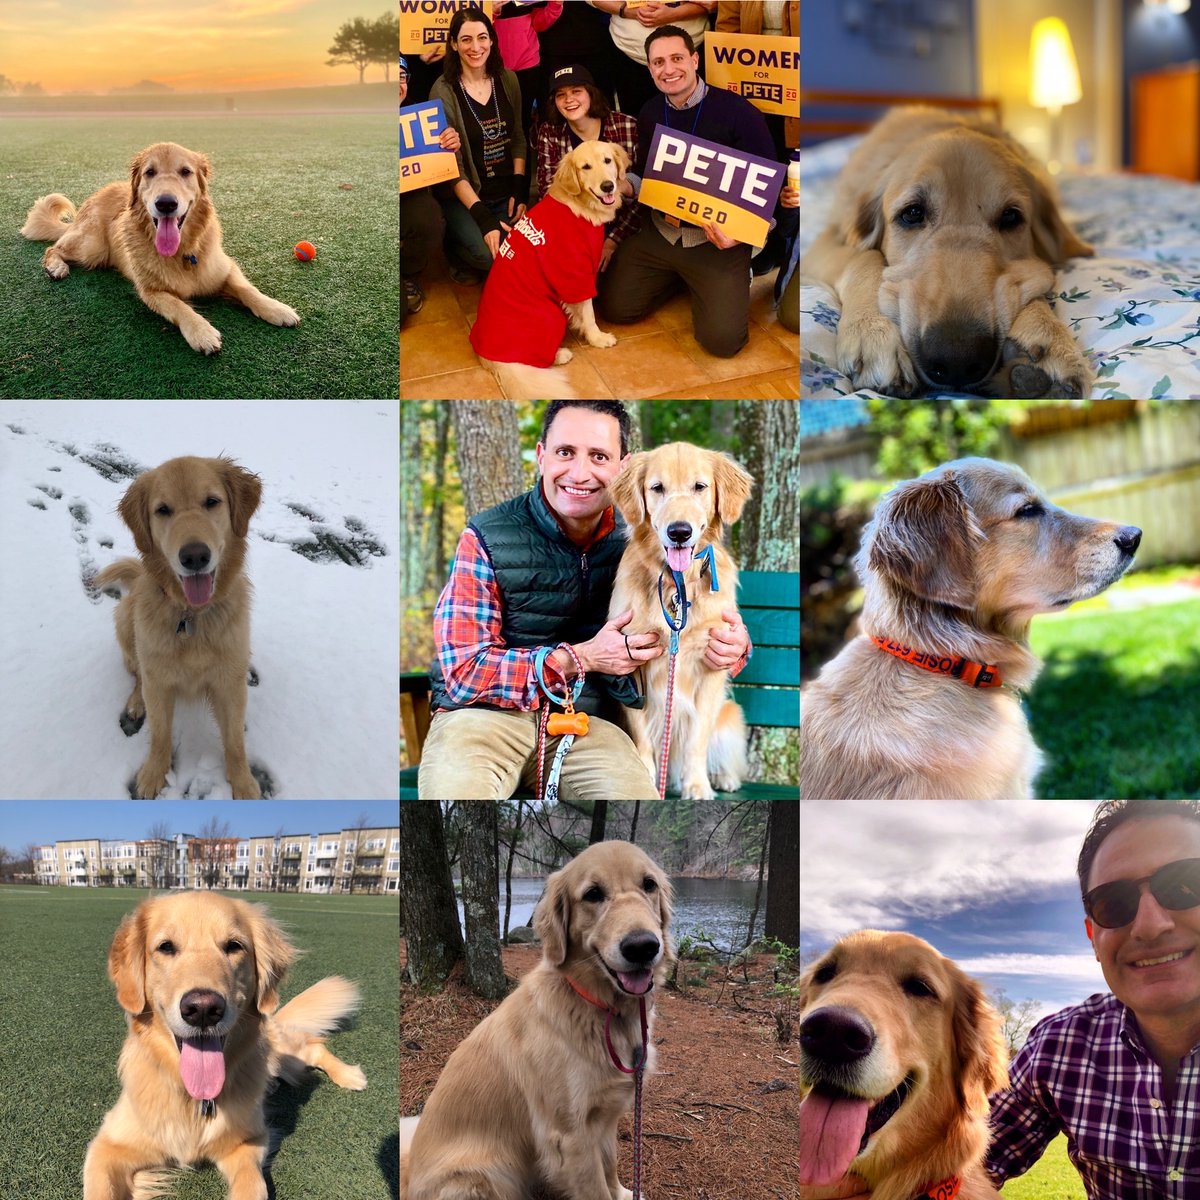 My #BFF Rosie turns 4 today! From caucusing for #petebuttigieg (yup, that was less than a year ago), to outdoor walks w/ friends, to snuggles-on-demand, Rosie has been the #COVID19 steady for me! Happy Birthday! #GoldenRetrievers @firstdogsSB #puppylove #TeamPete #SundayFunday